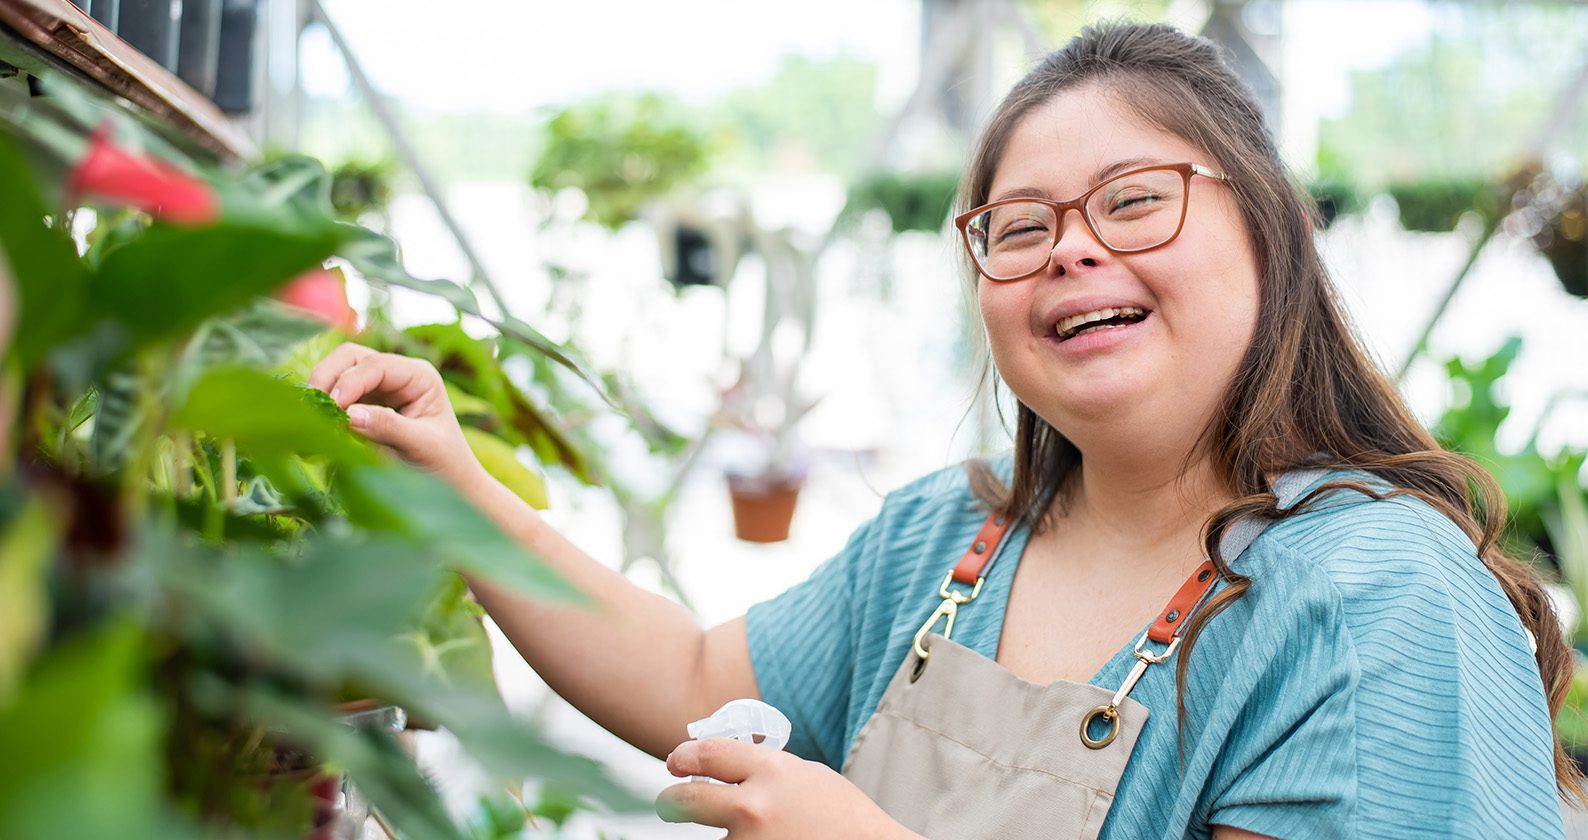 A woman with down syndrome working in a gardening greenhouse and smiling.